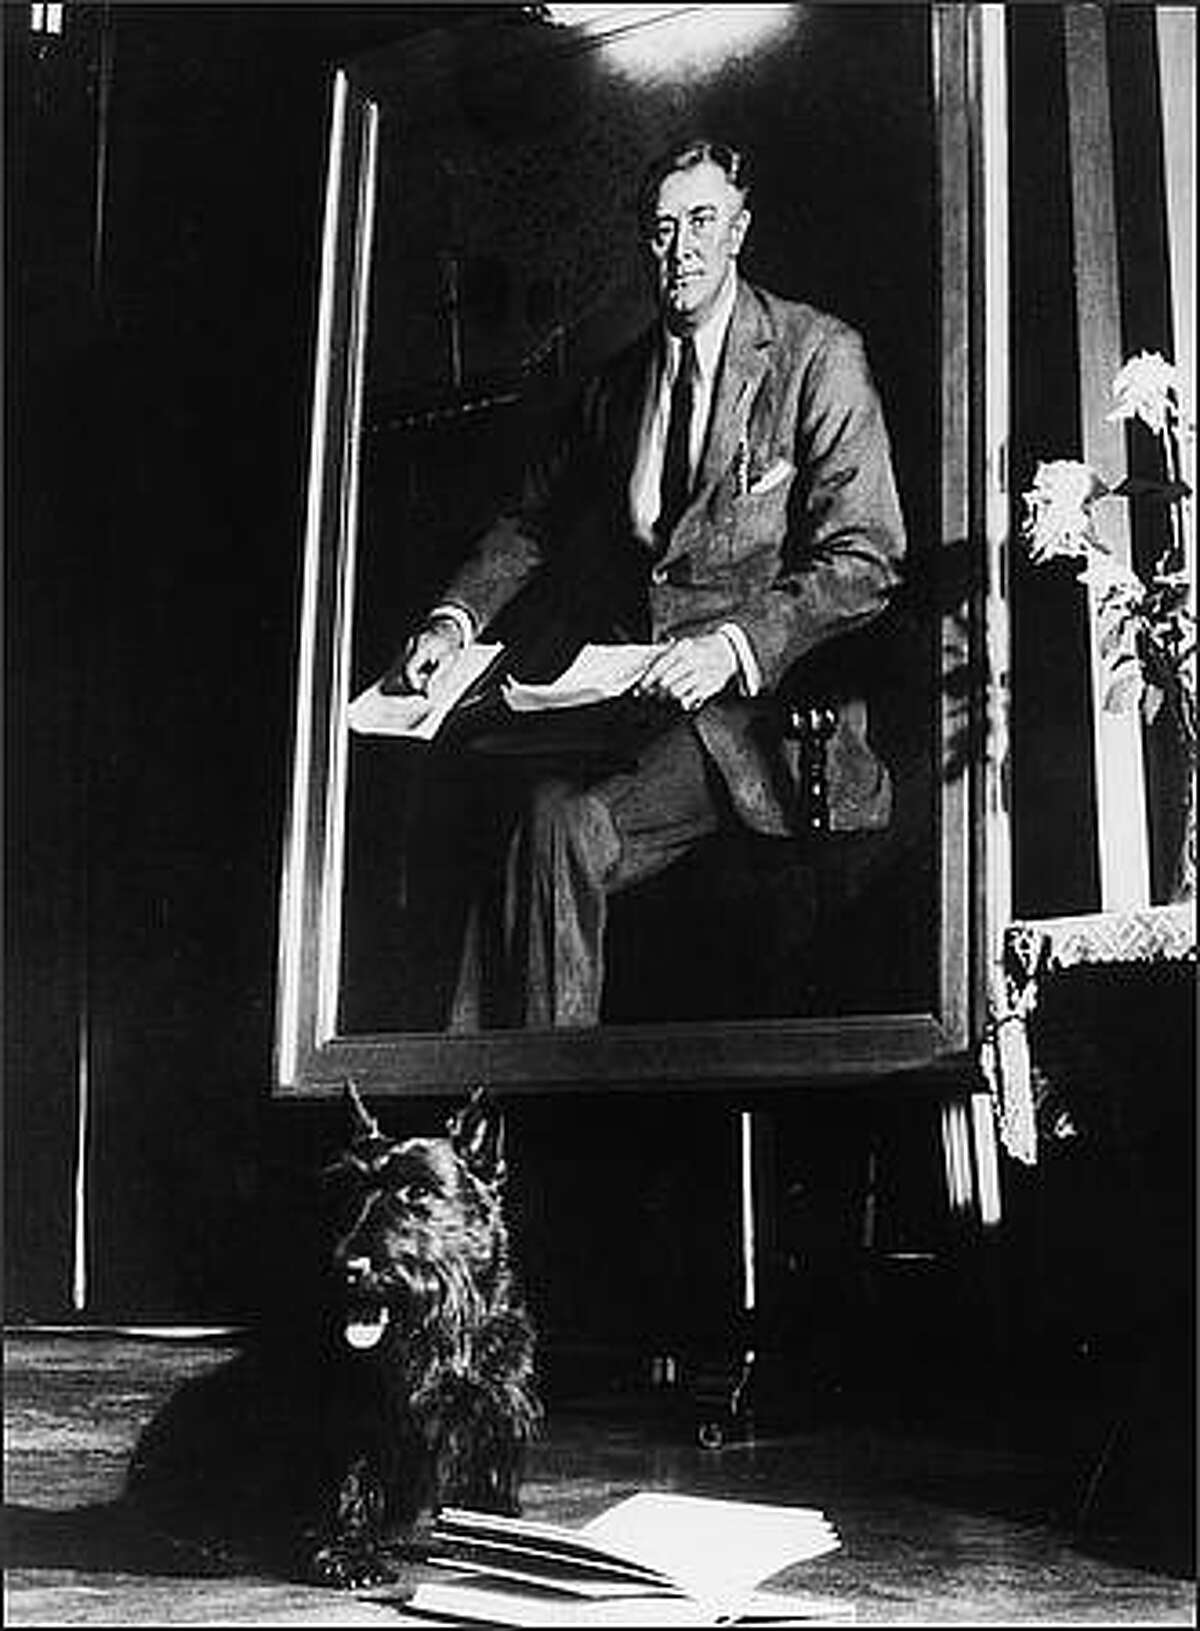 President Franklin D. Roosevelt's pet Scottish Terrier Fala sits beside an open book in front of a portrait of the president, 1940s. (Photo by Pictorial Parade/Getty Images)